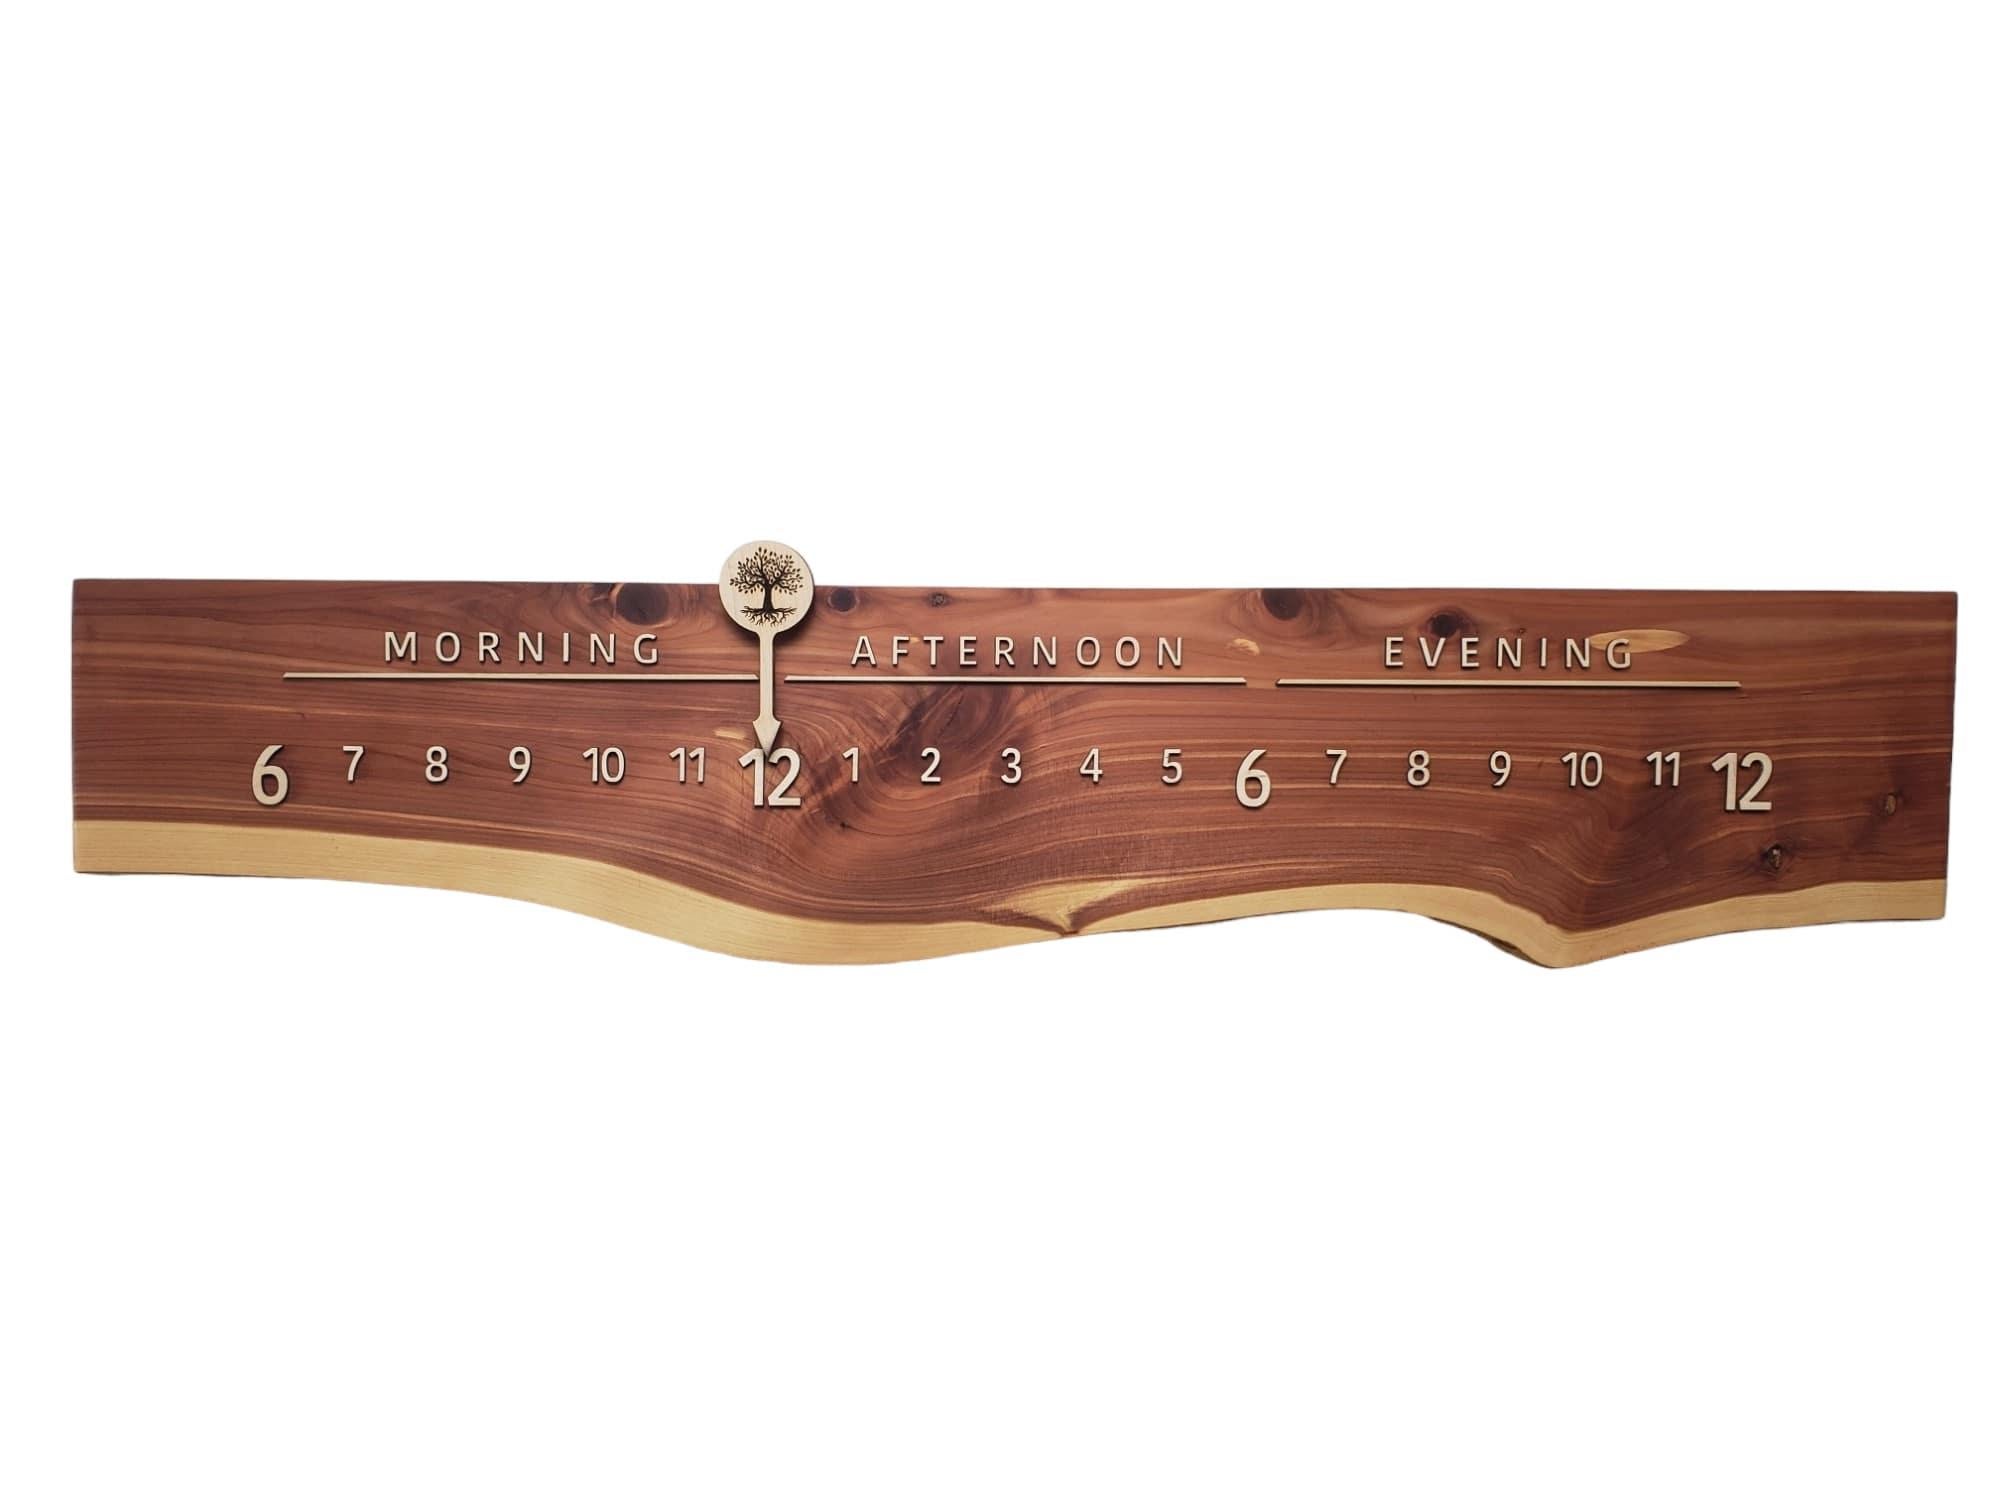 Treasure is a Linear Clock featuring a stunning length of Cedar with a crisply delineated gleaming sapwood edge.

Linear Clocks are an invention of Linear Clockworks; these clocks tell time in a calm, simple, and elegant fashion. We use